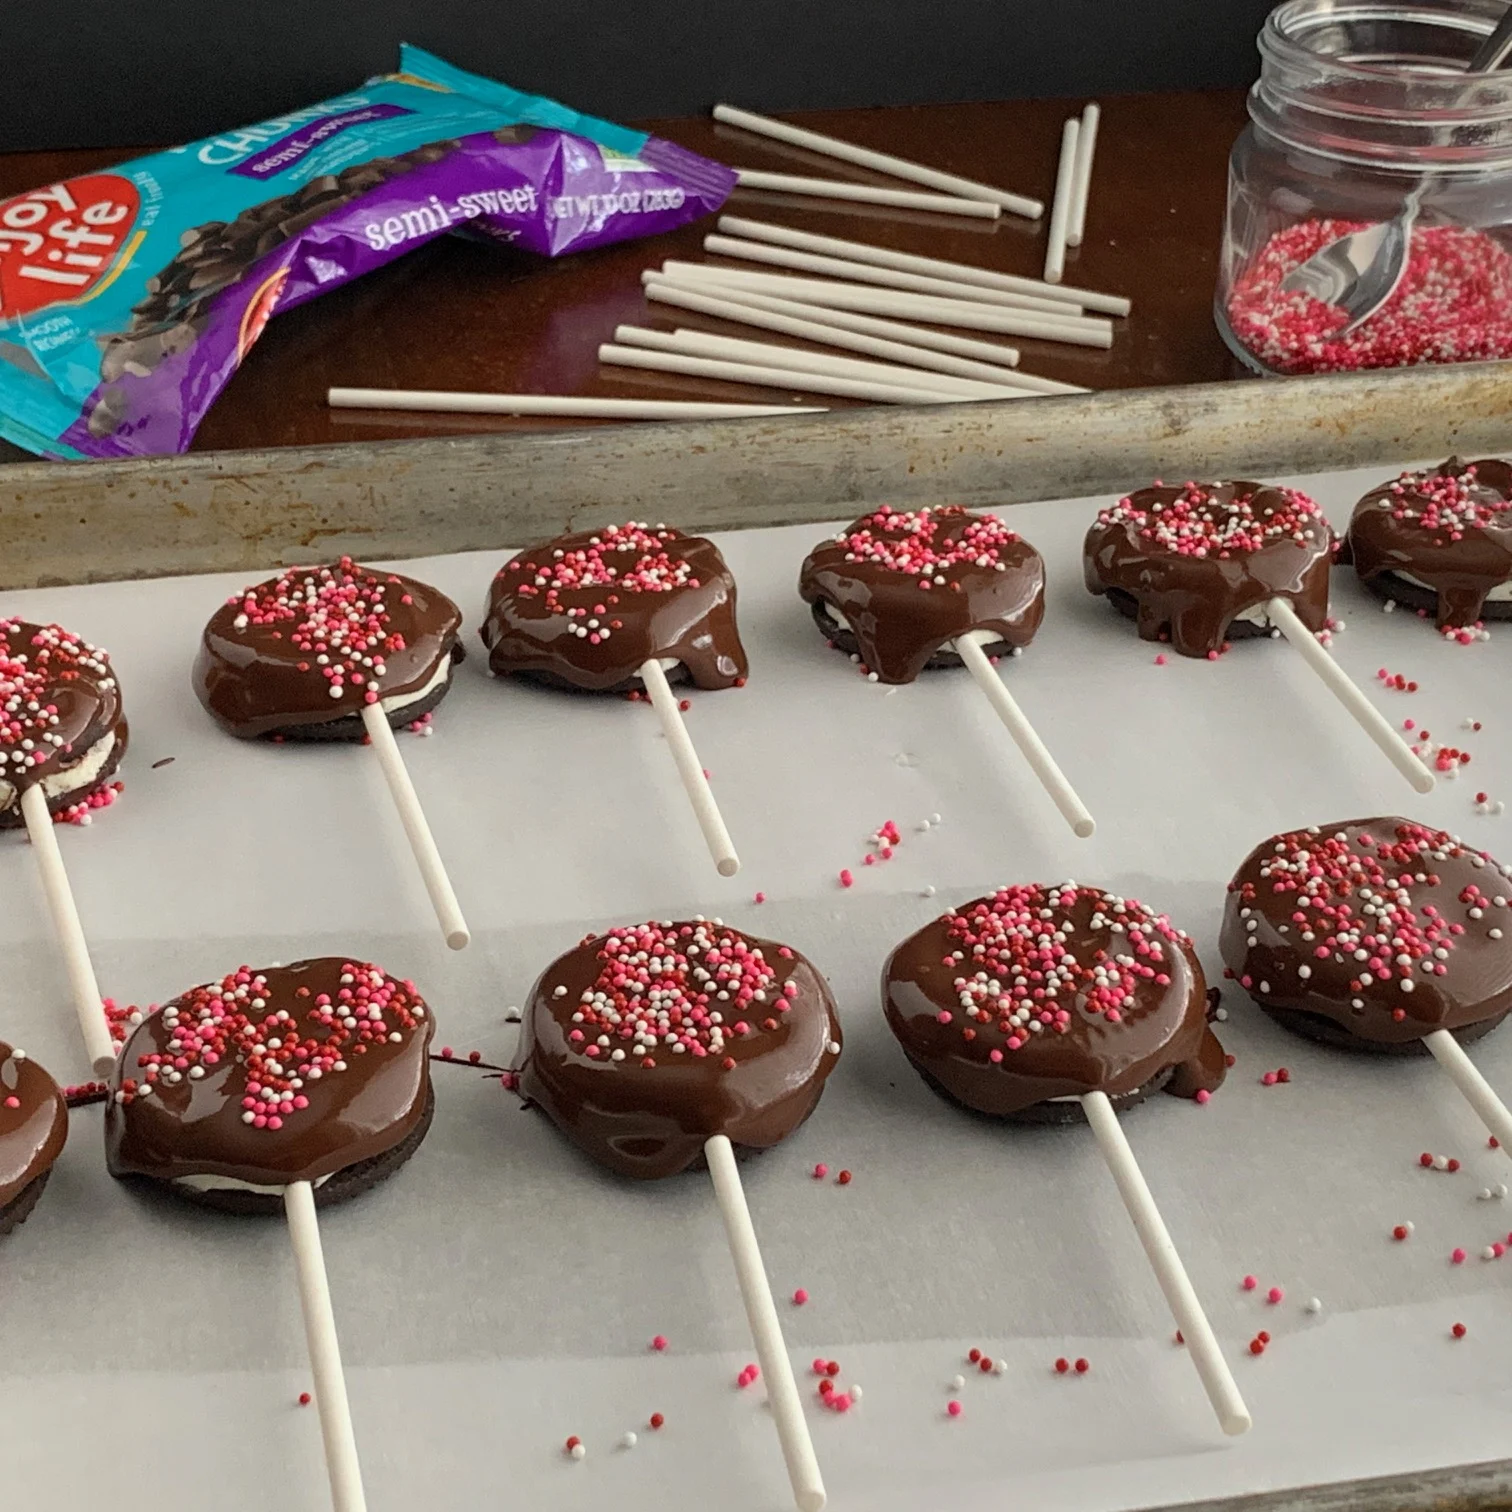 Chocolate dipped gluten and dairy free ores on a stick with festive white, pink, and red sprinkles. 